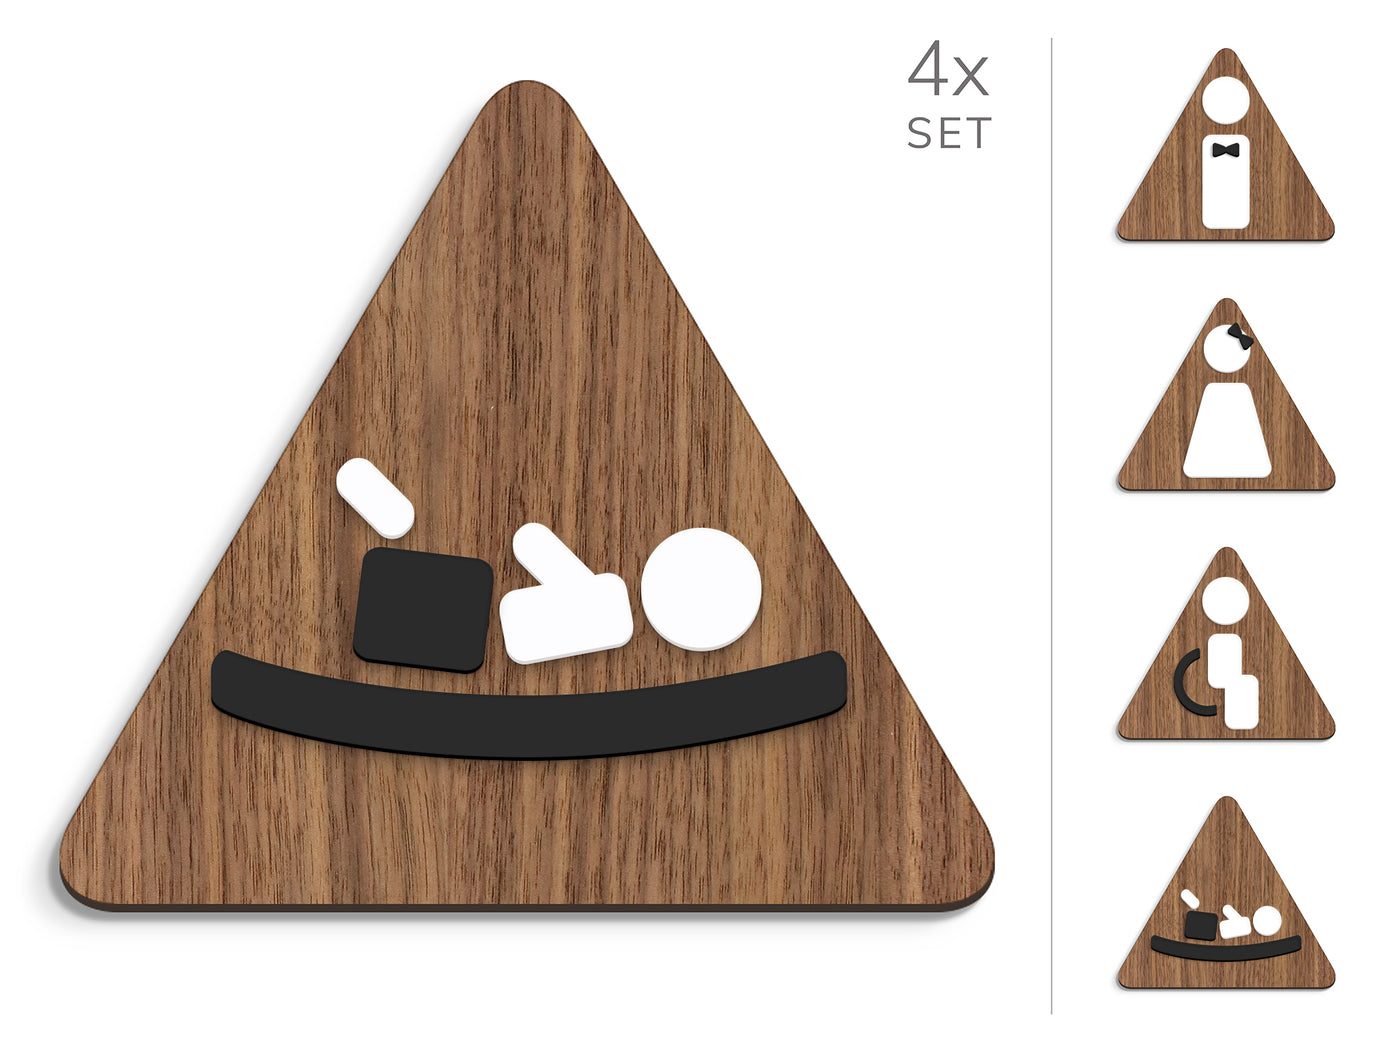 Styled knot, 4x Triangle Base - Restroom Signs Set - Man, Woman, Disabled, Changing table